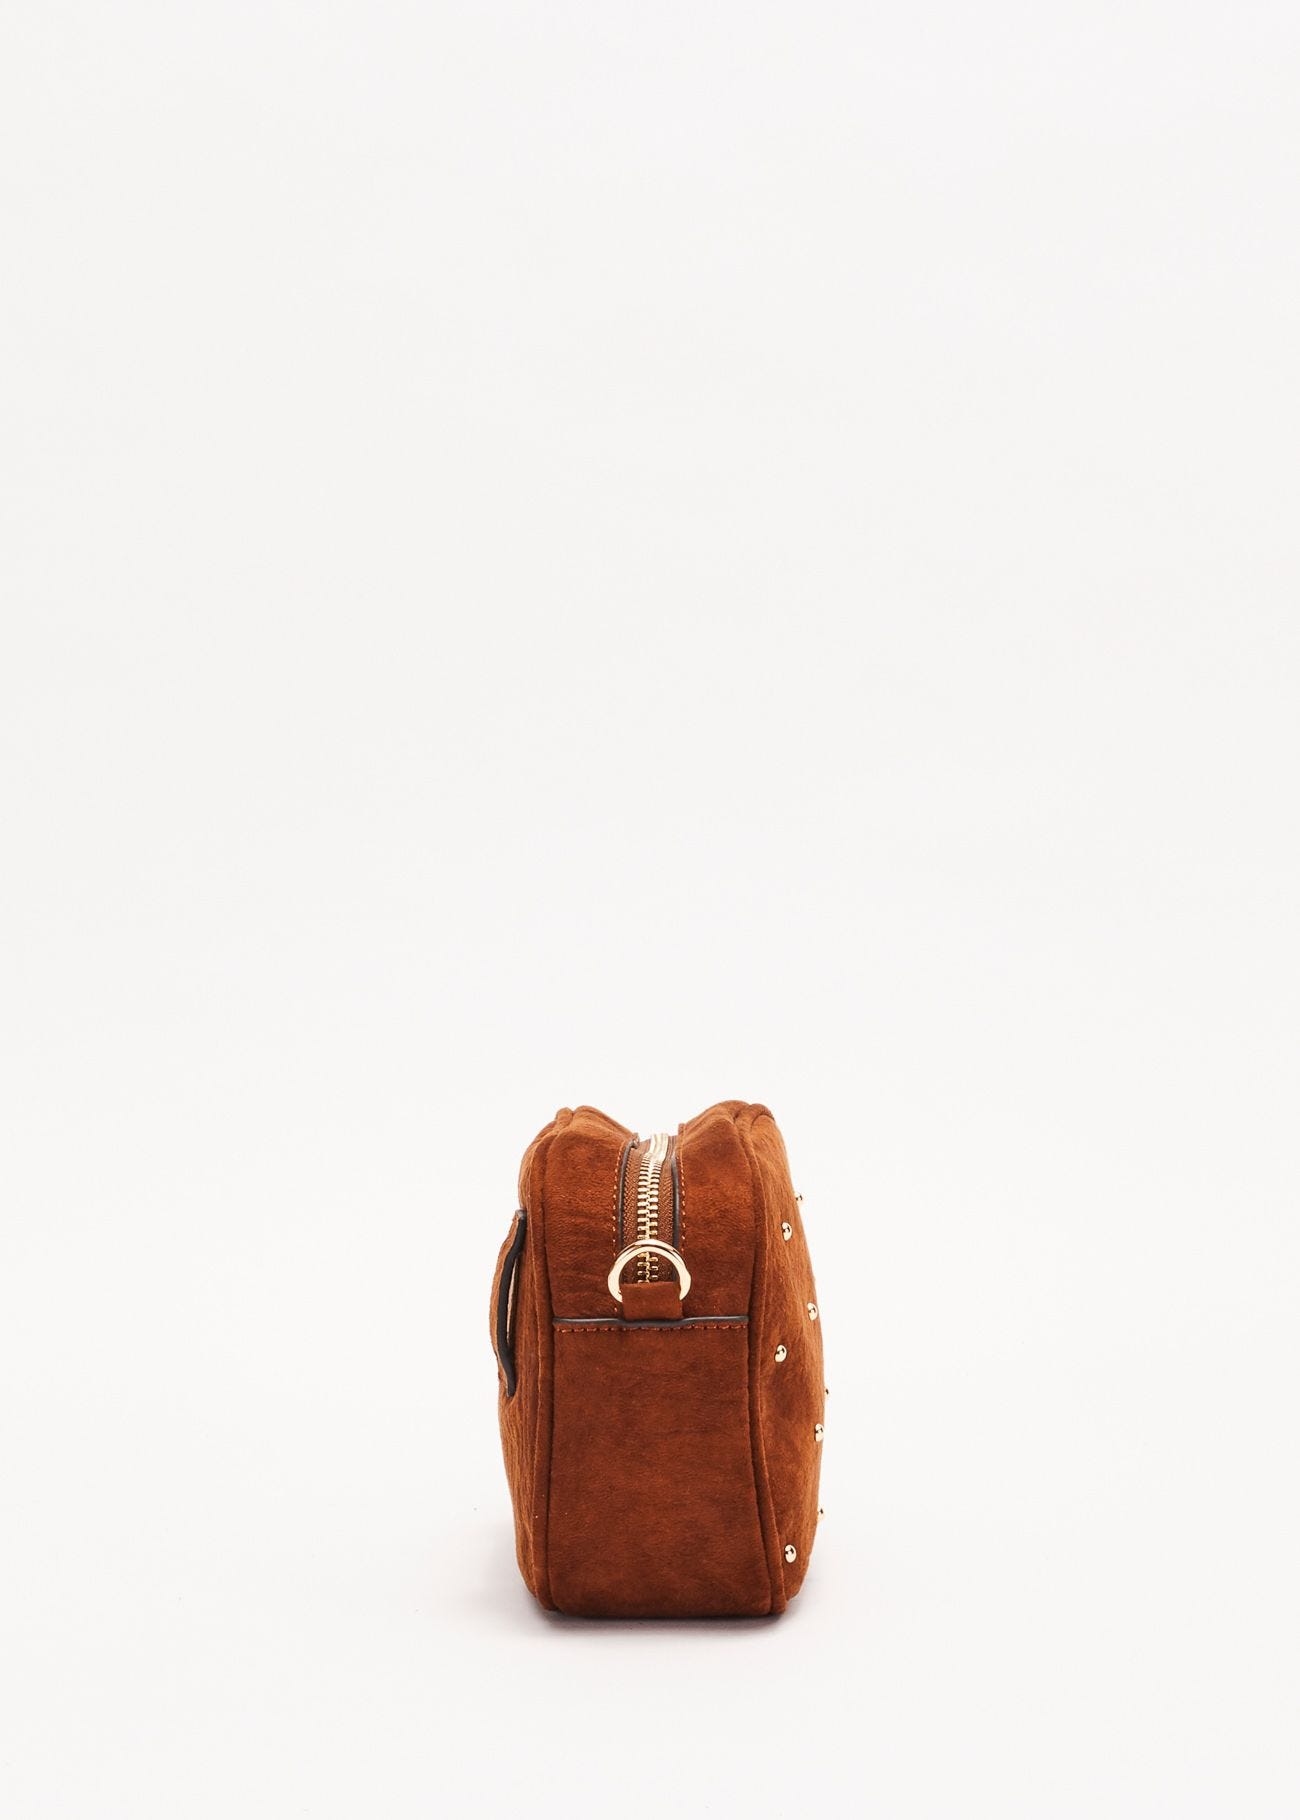 Studded suede-effect mini bag